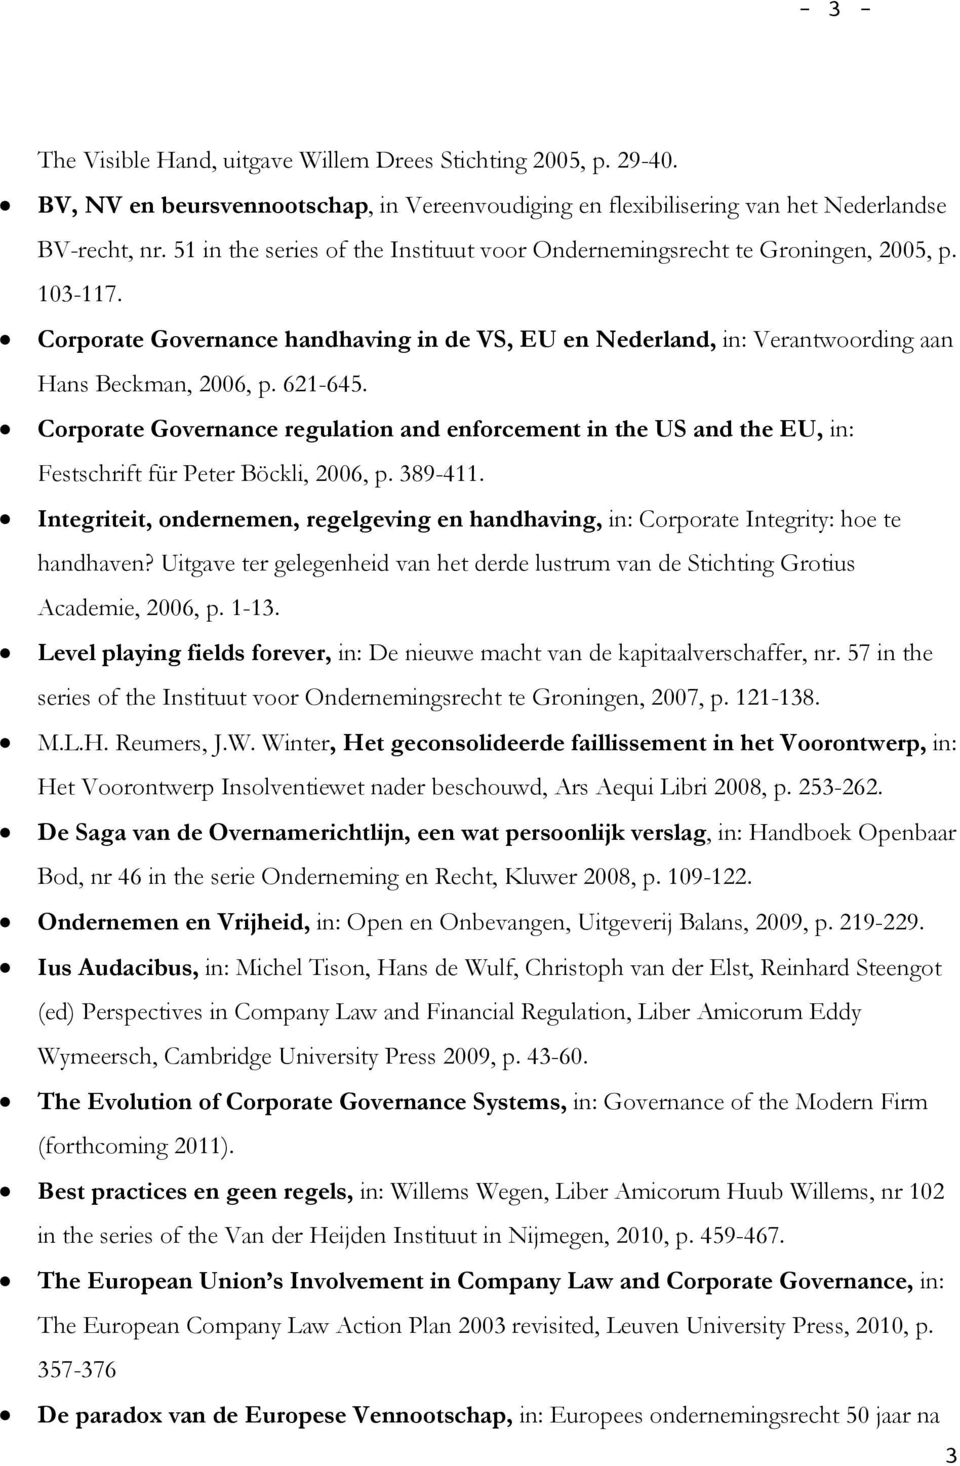 621-645. Corporate Governance regulation and enforcement in the US and the EU, in: Festschrift für Peter Böckli, 2006, p. 389-411.